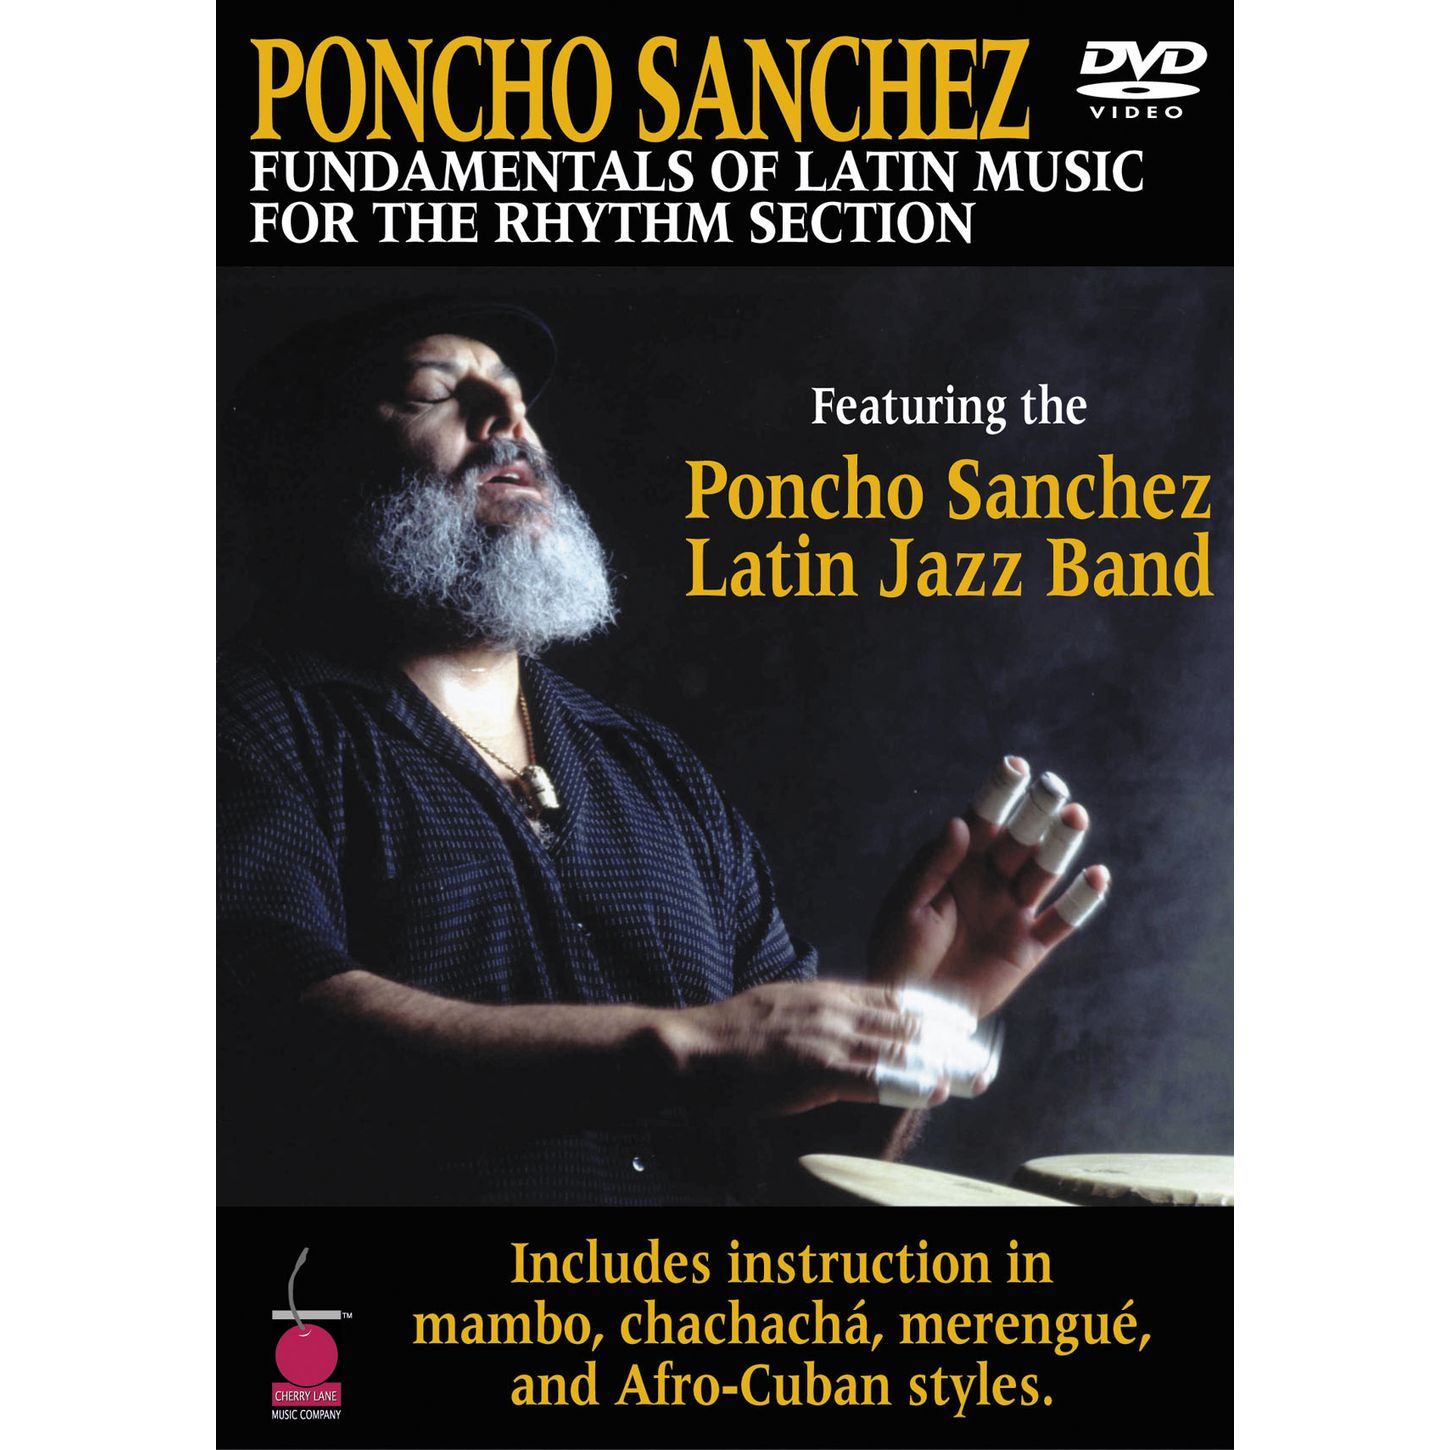 Poncho Sanchez: Fundamentals of Latin Music for the Rhythm Section